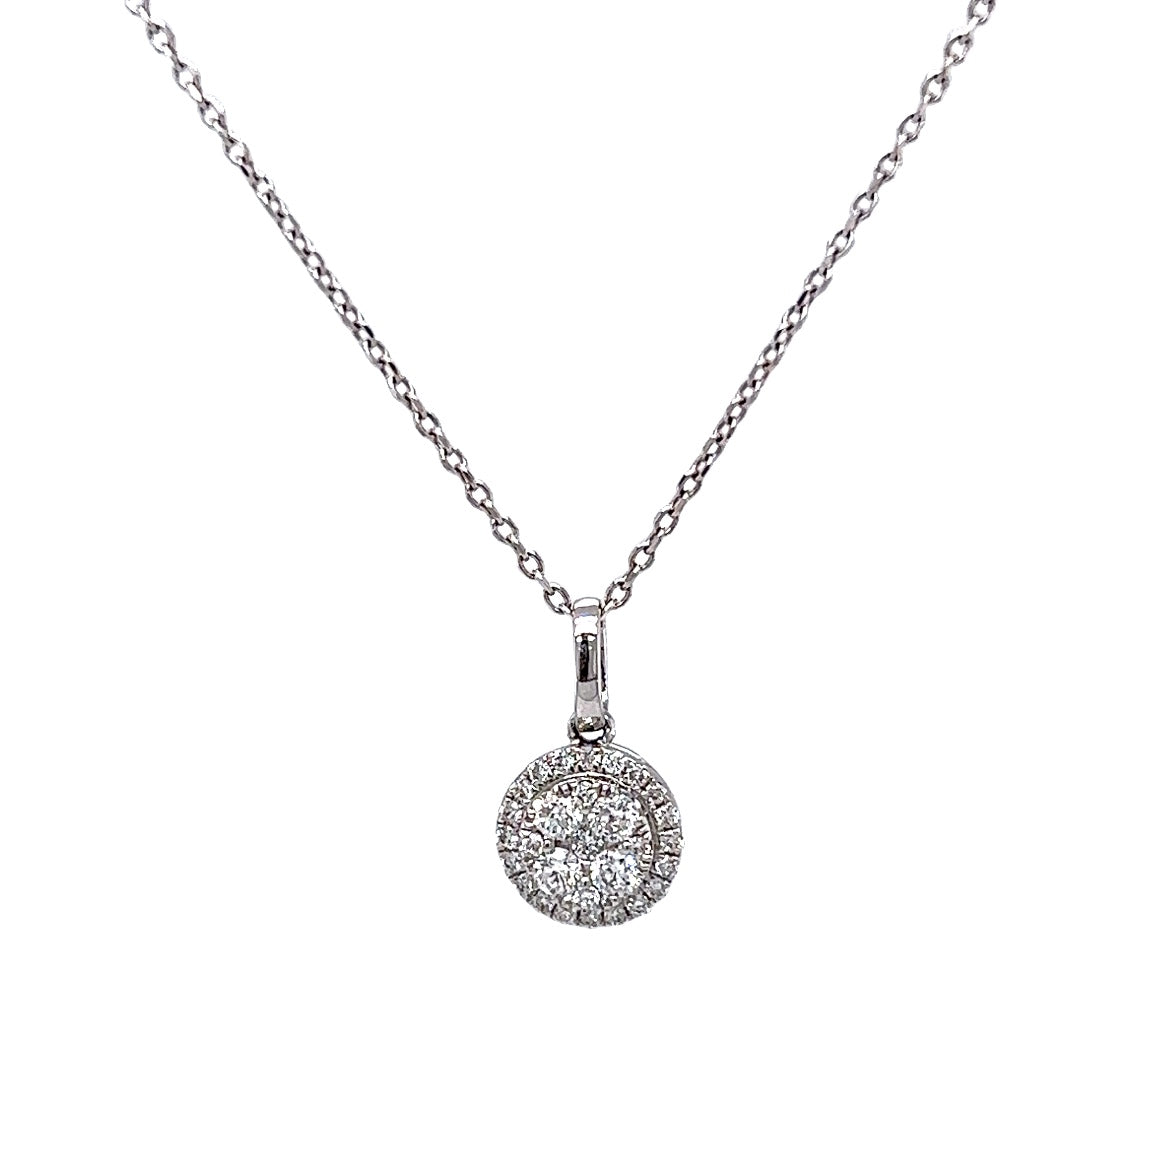 .26 Round Pave Diamond Pendant Necklace in 14k White Gold